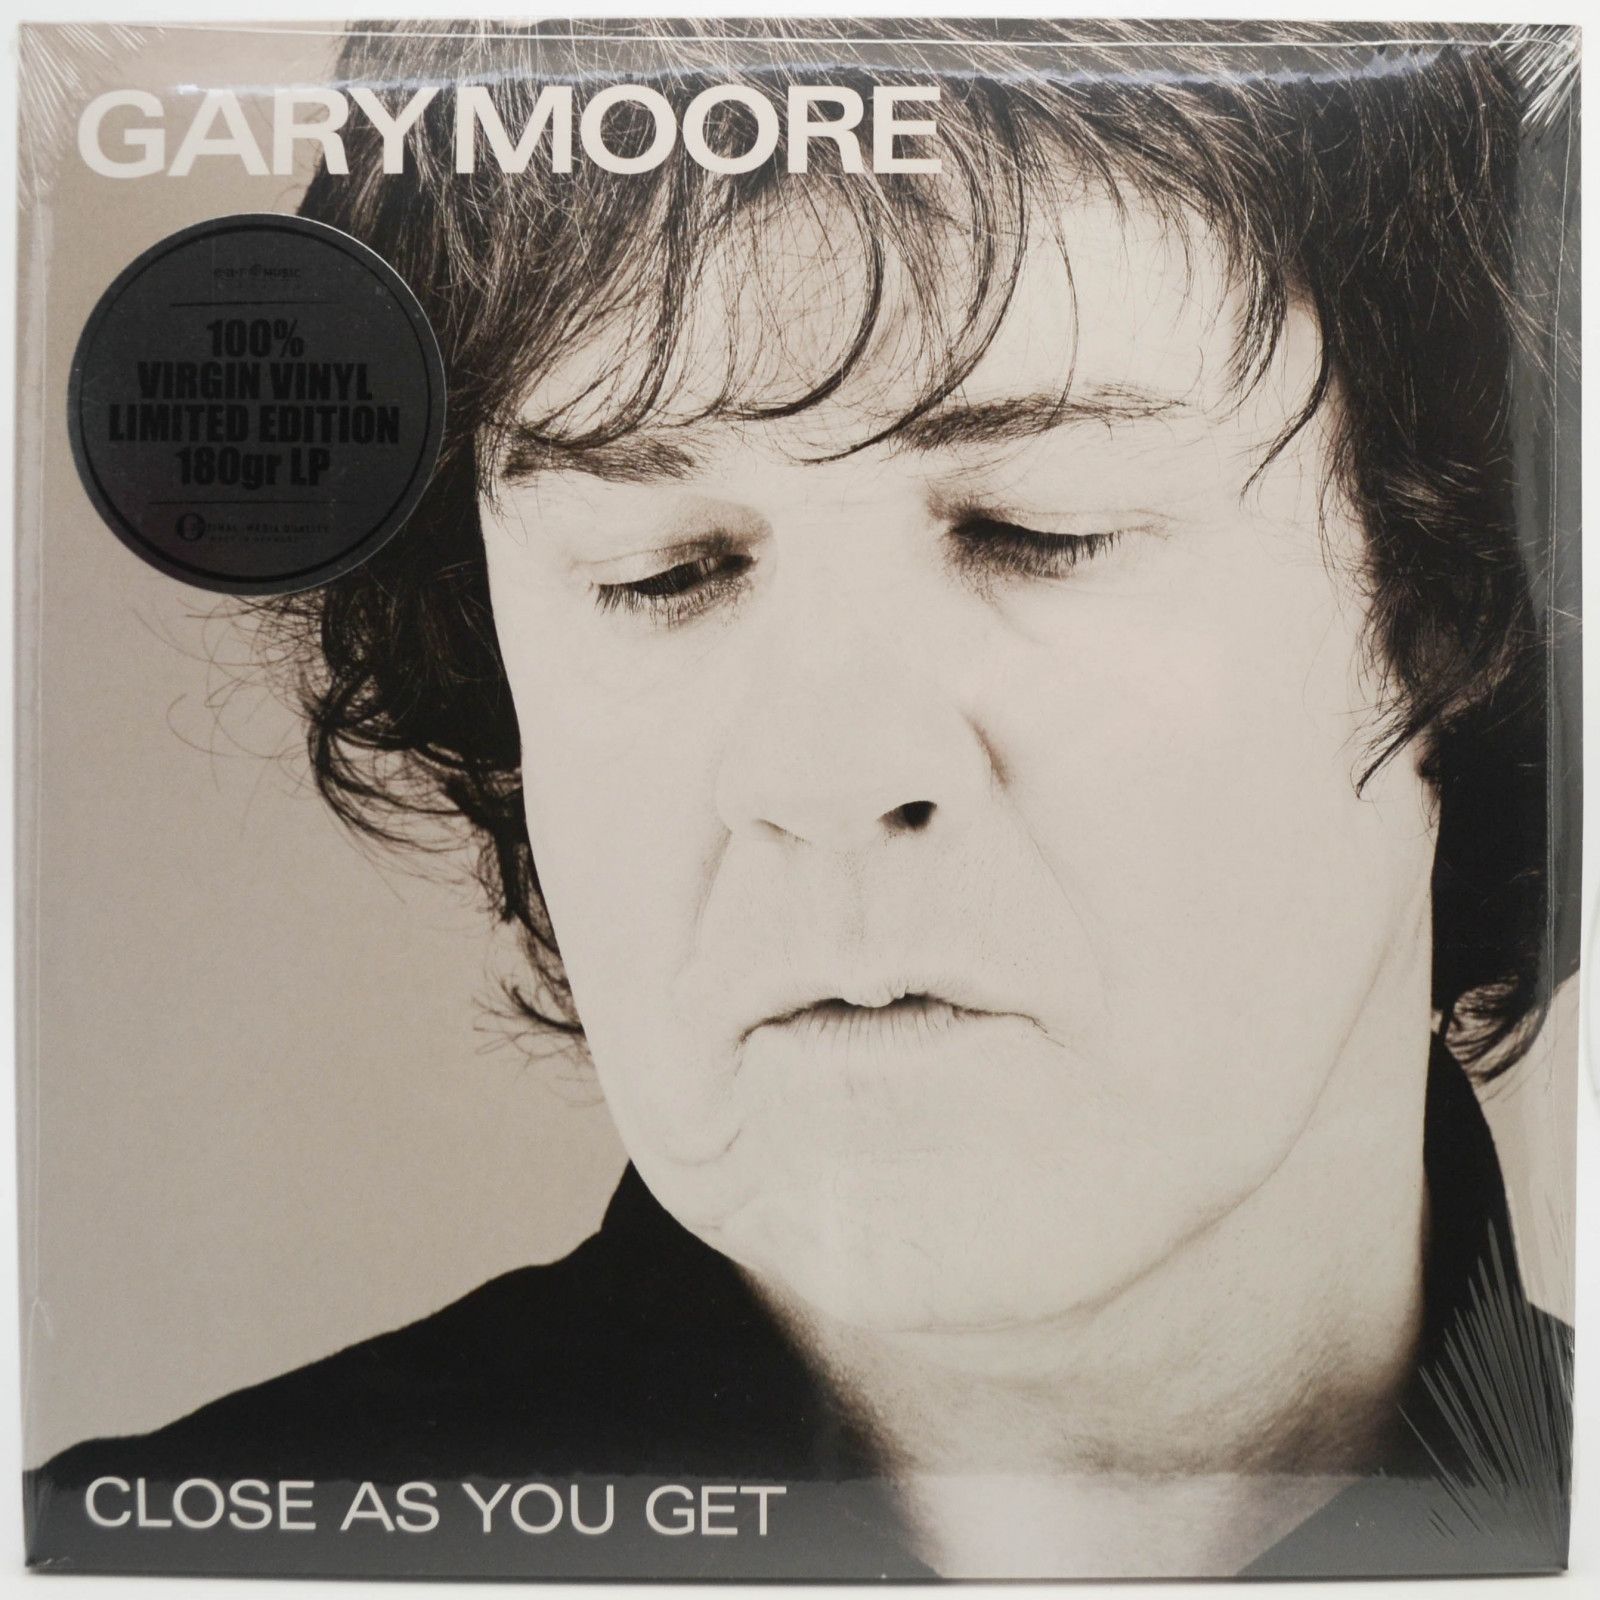 Gary Moore — Close As You Get (2LP), 2007